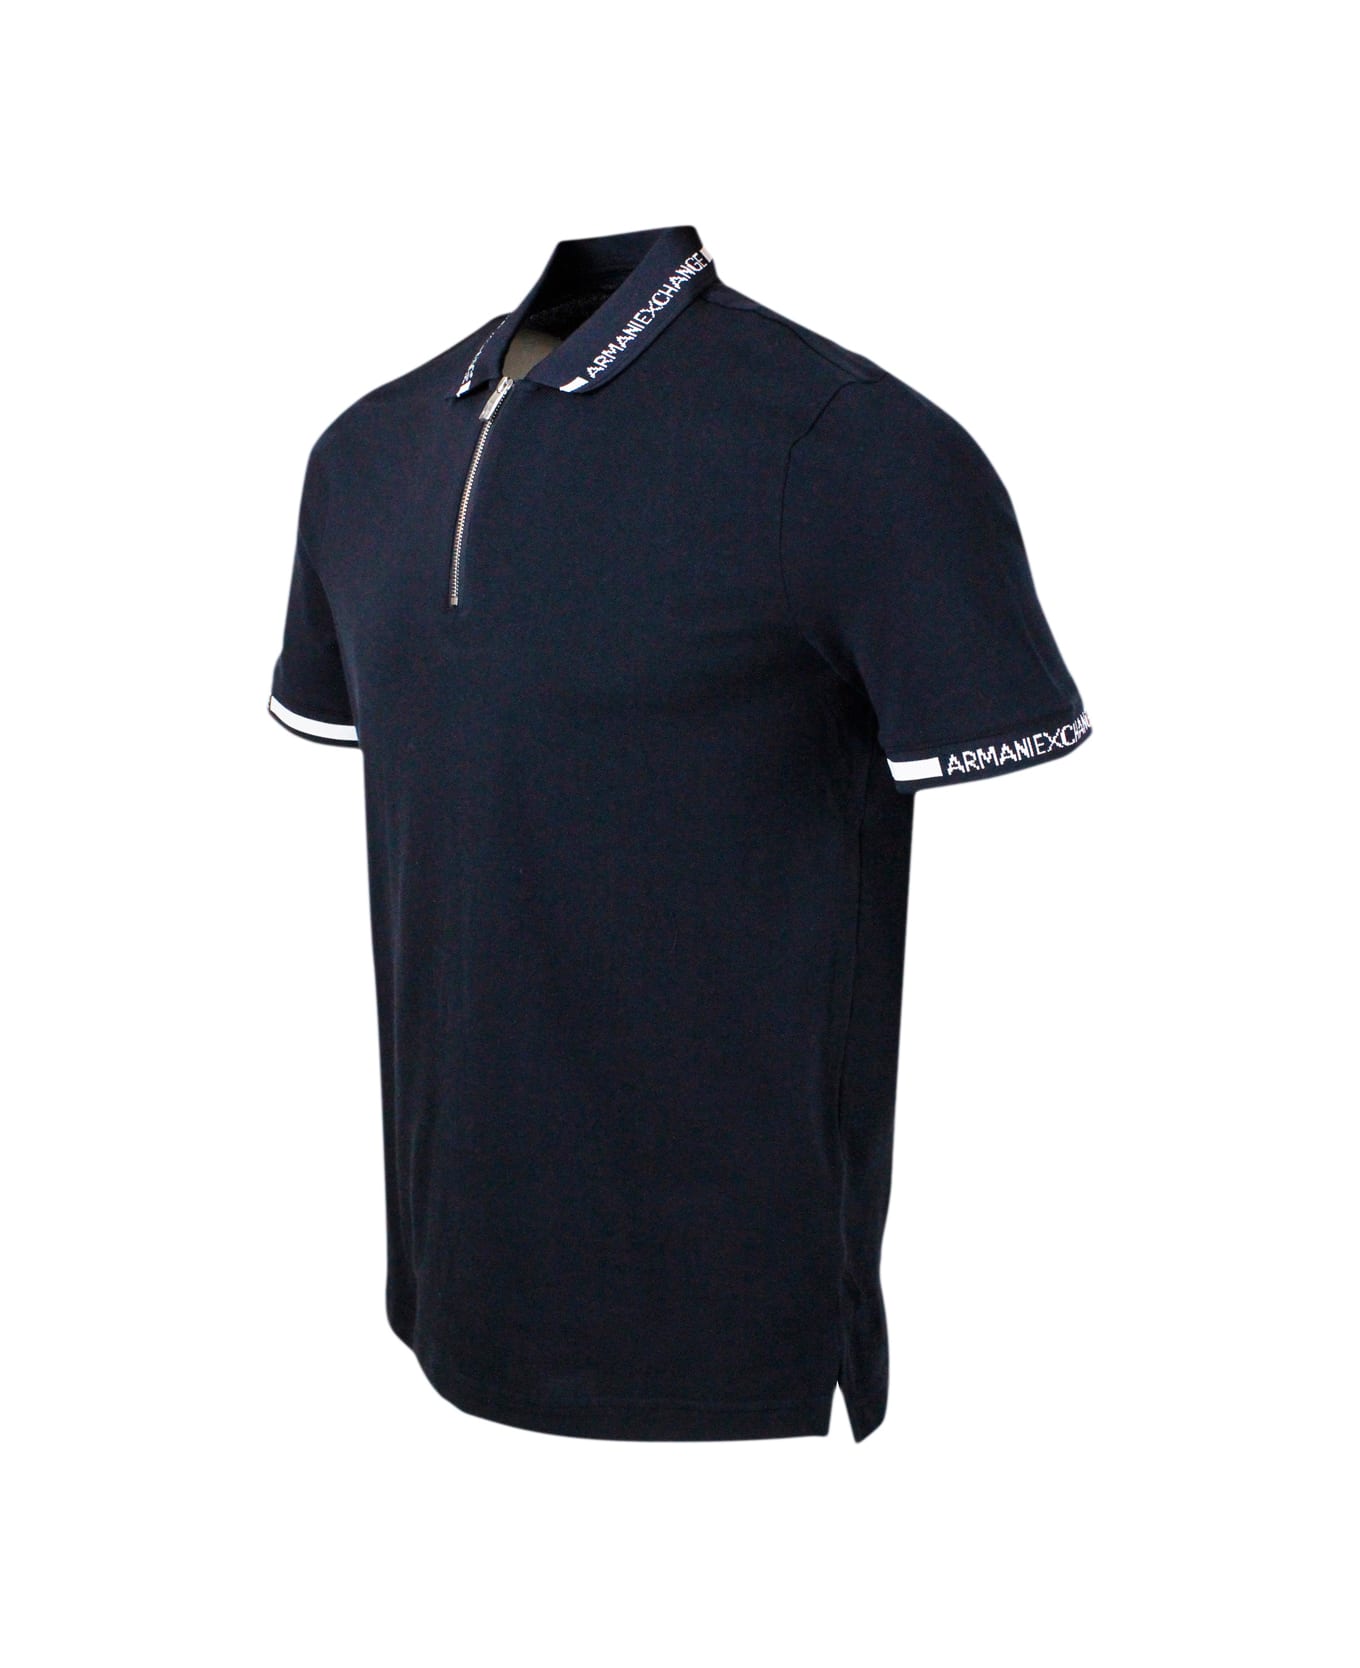 Armani Collezioni Hort-sleeved Pique Cotton Polo Shirt With Zip Closure And Writing On The Collar - Blue ポロシャツ